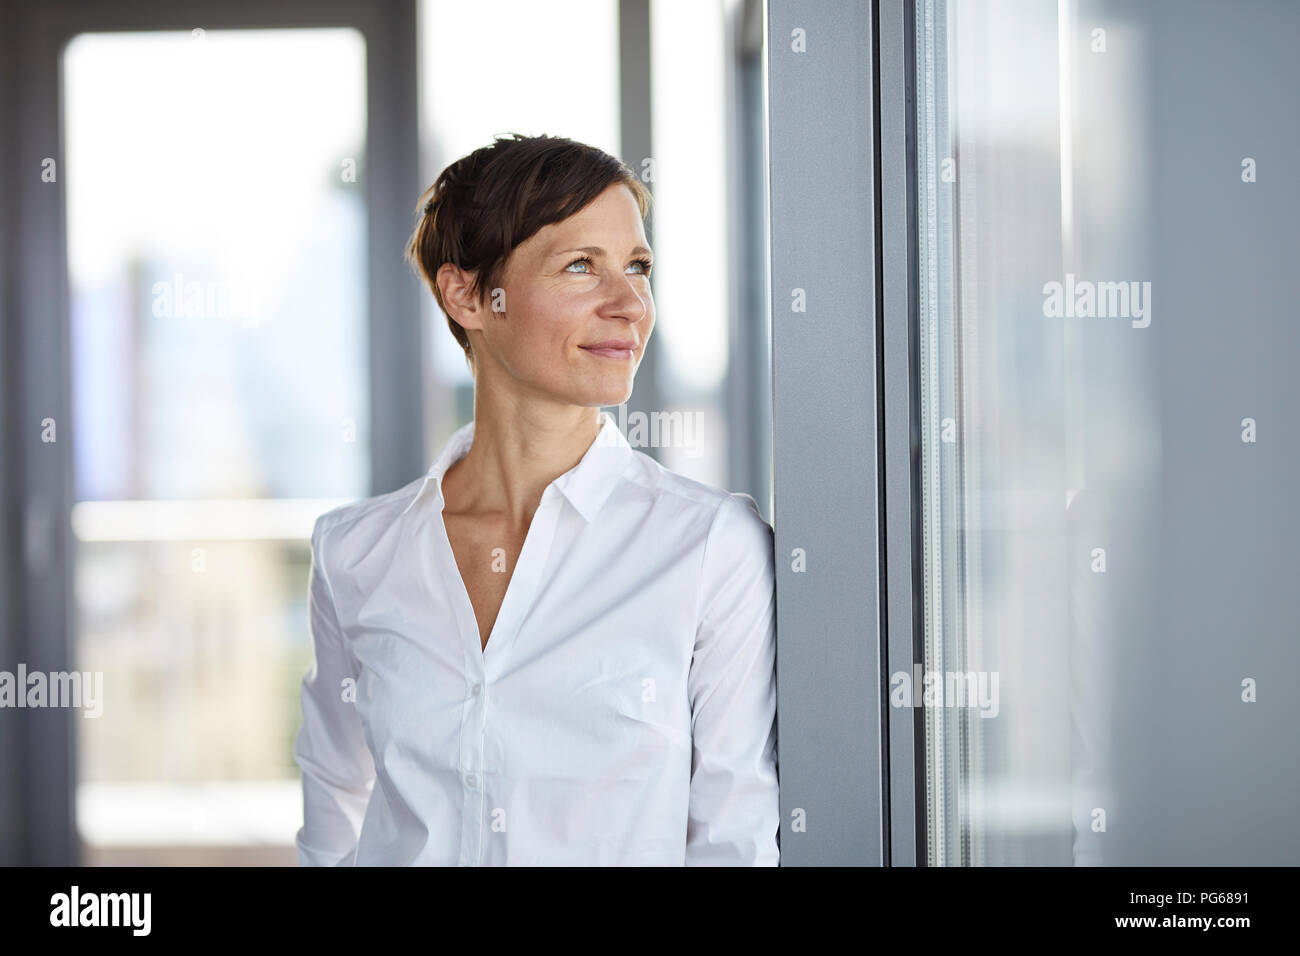 Smiling businesswoman in office looking sideways Stock Photo